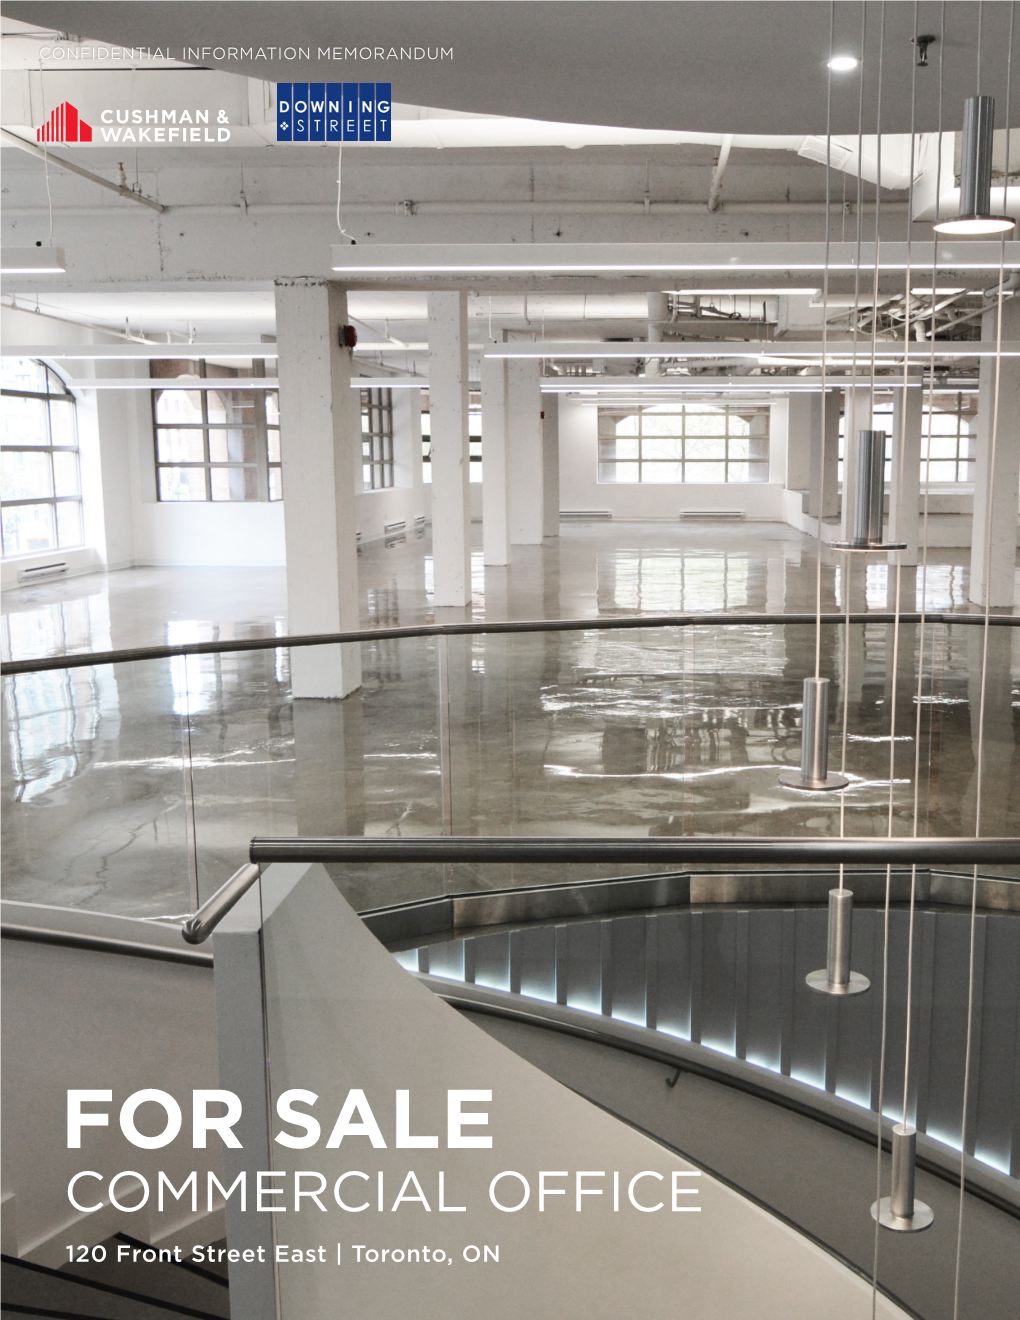 FOR SALE COMMERCIAL OFFICE 120 Front Street East | Toronto, on CONTACT INFORMATION SUBMISSION GUIDELINES